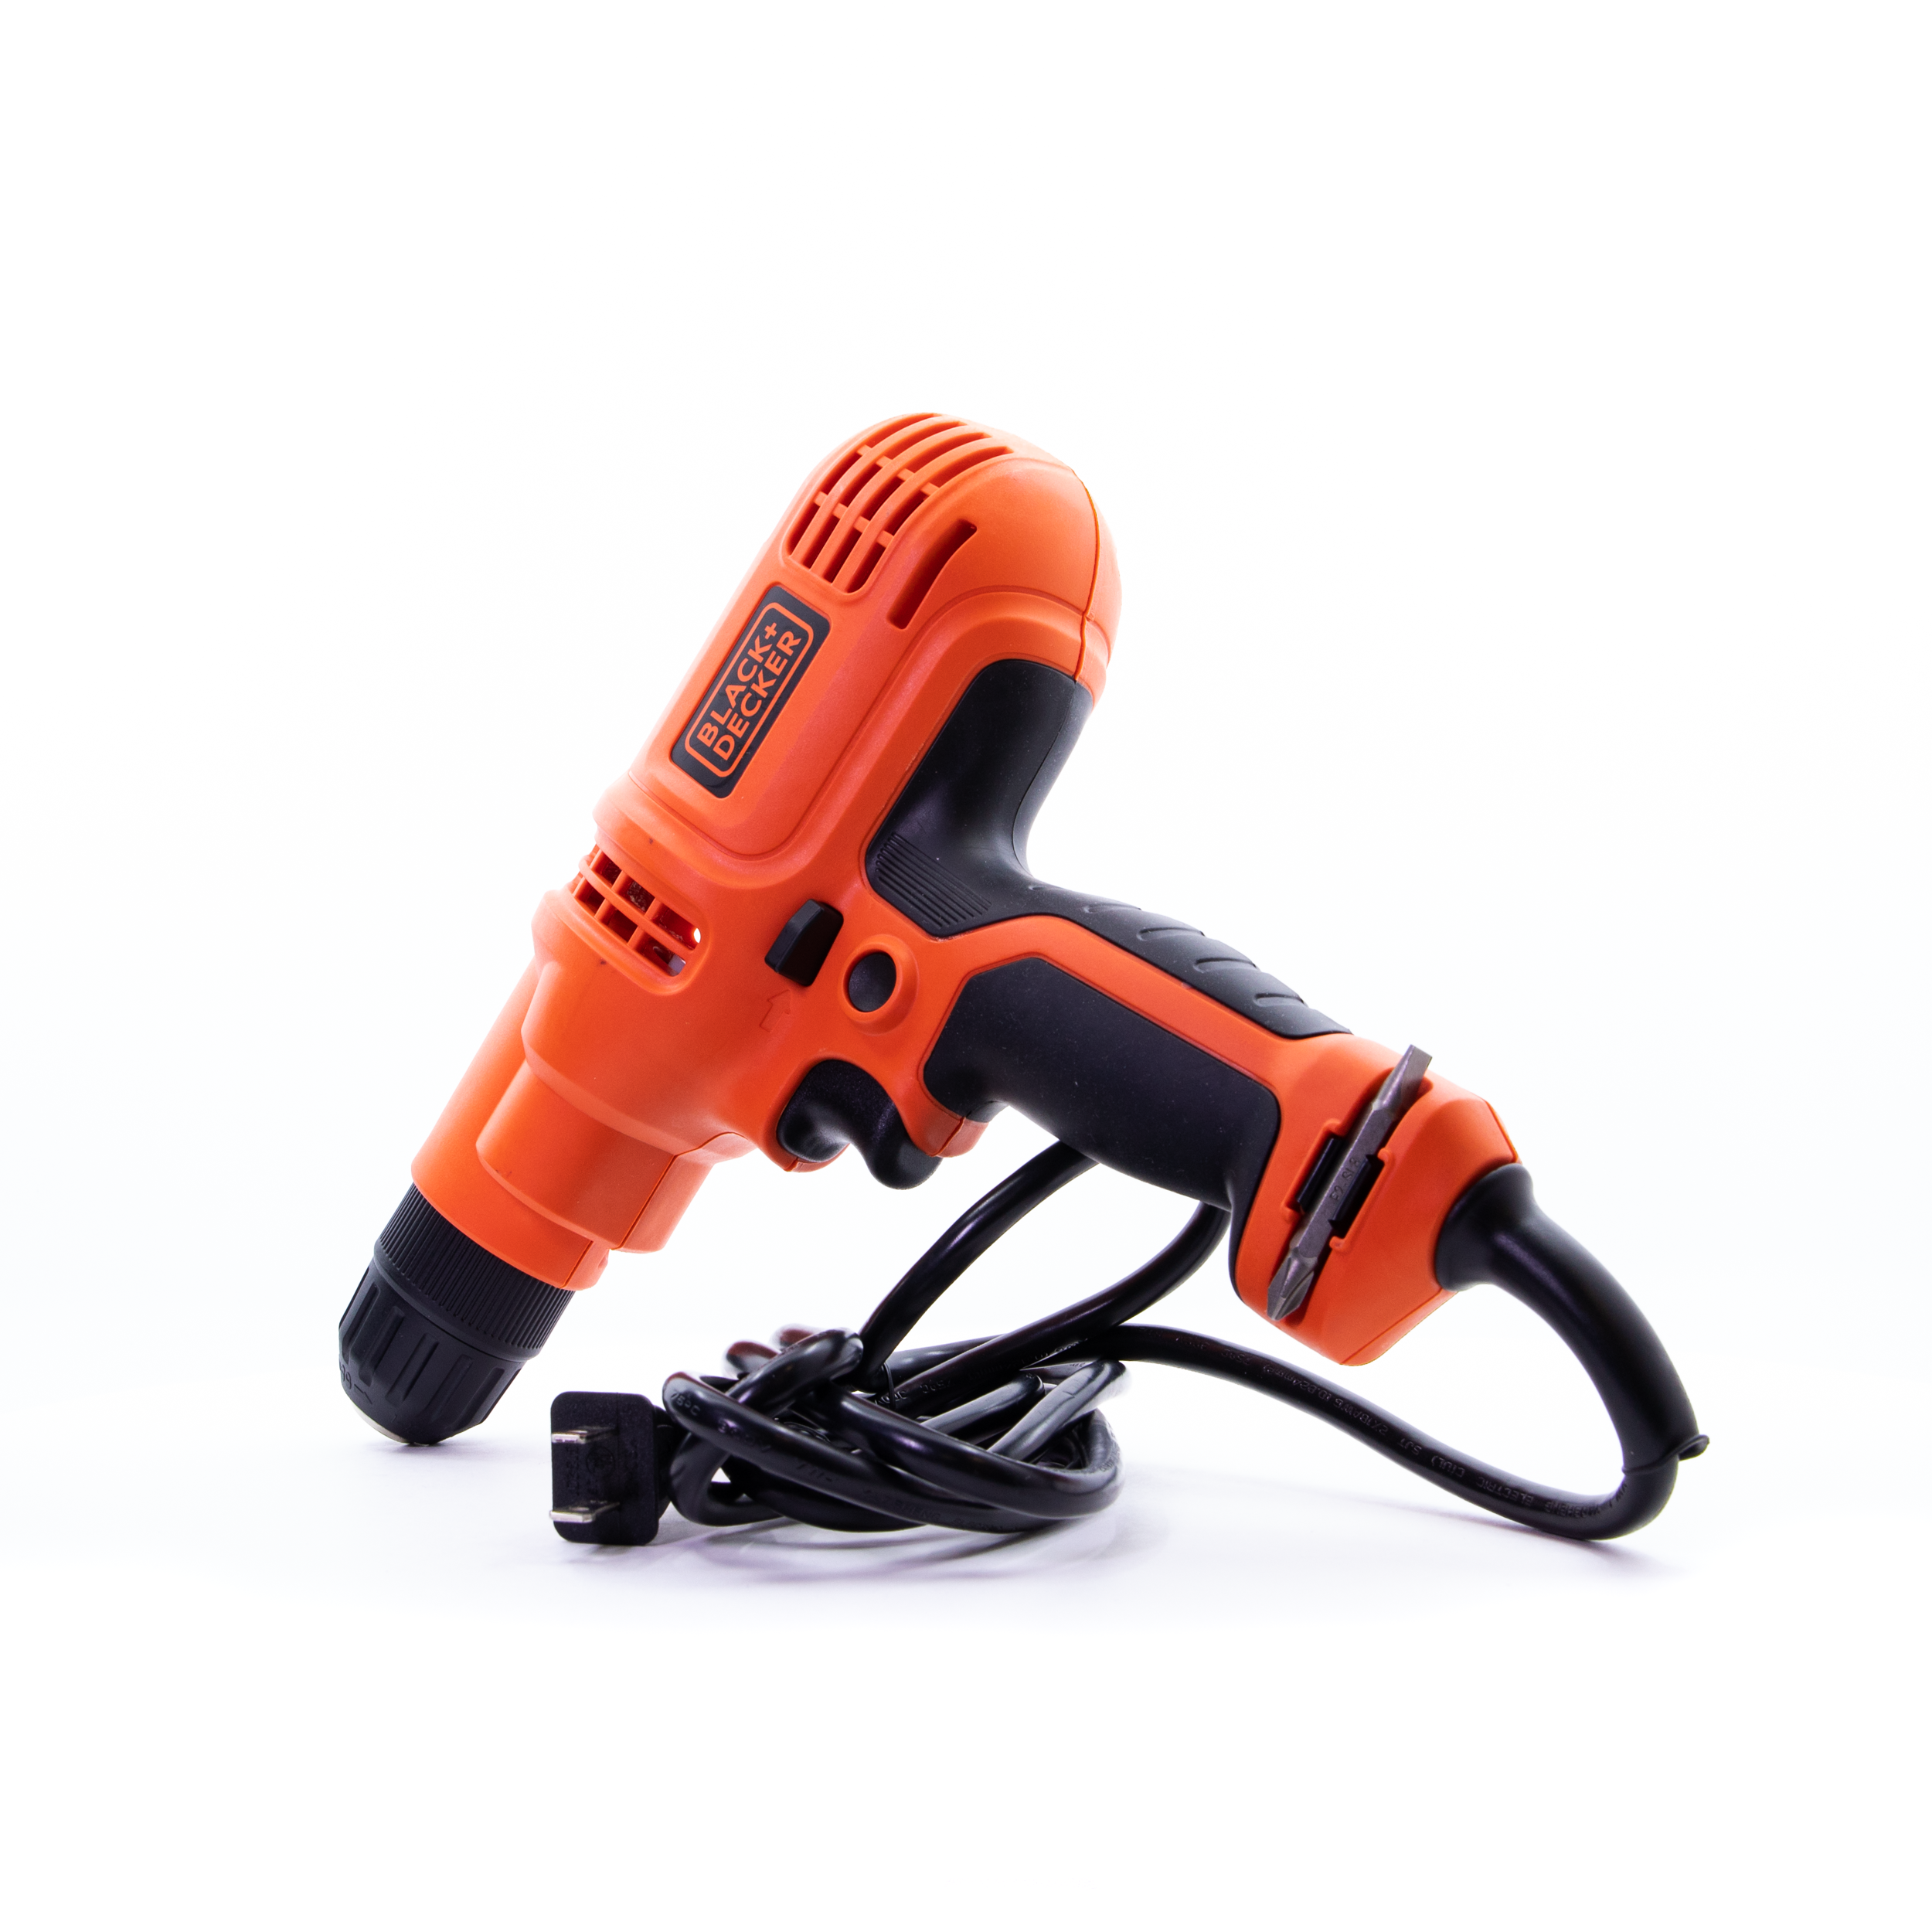  BLACK+DECKER Corded Drill with MarkIT Picture Hanging Tool Kit  (DR260C & BDMKIT101C) : Tools & Home Improvement